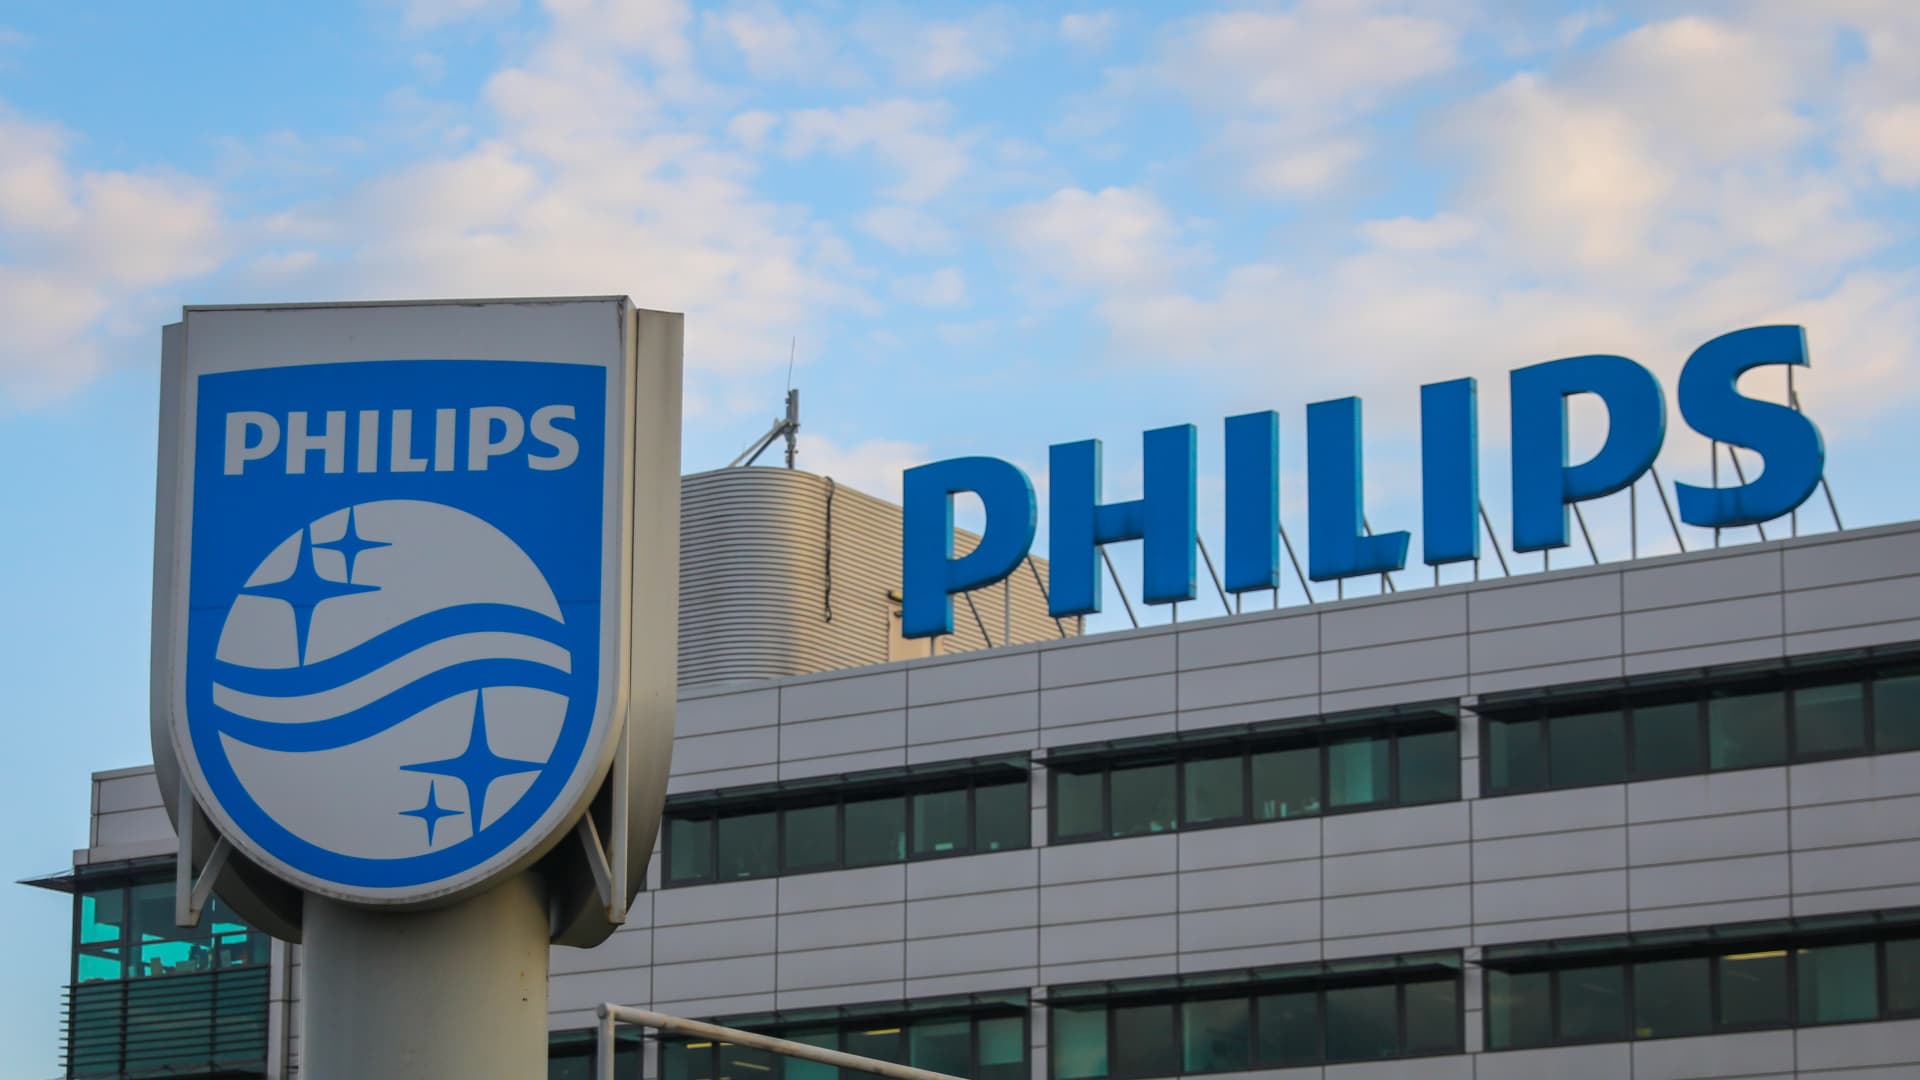 Philips Off Campus Drive